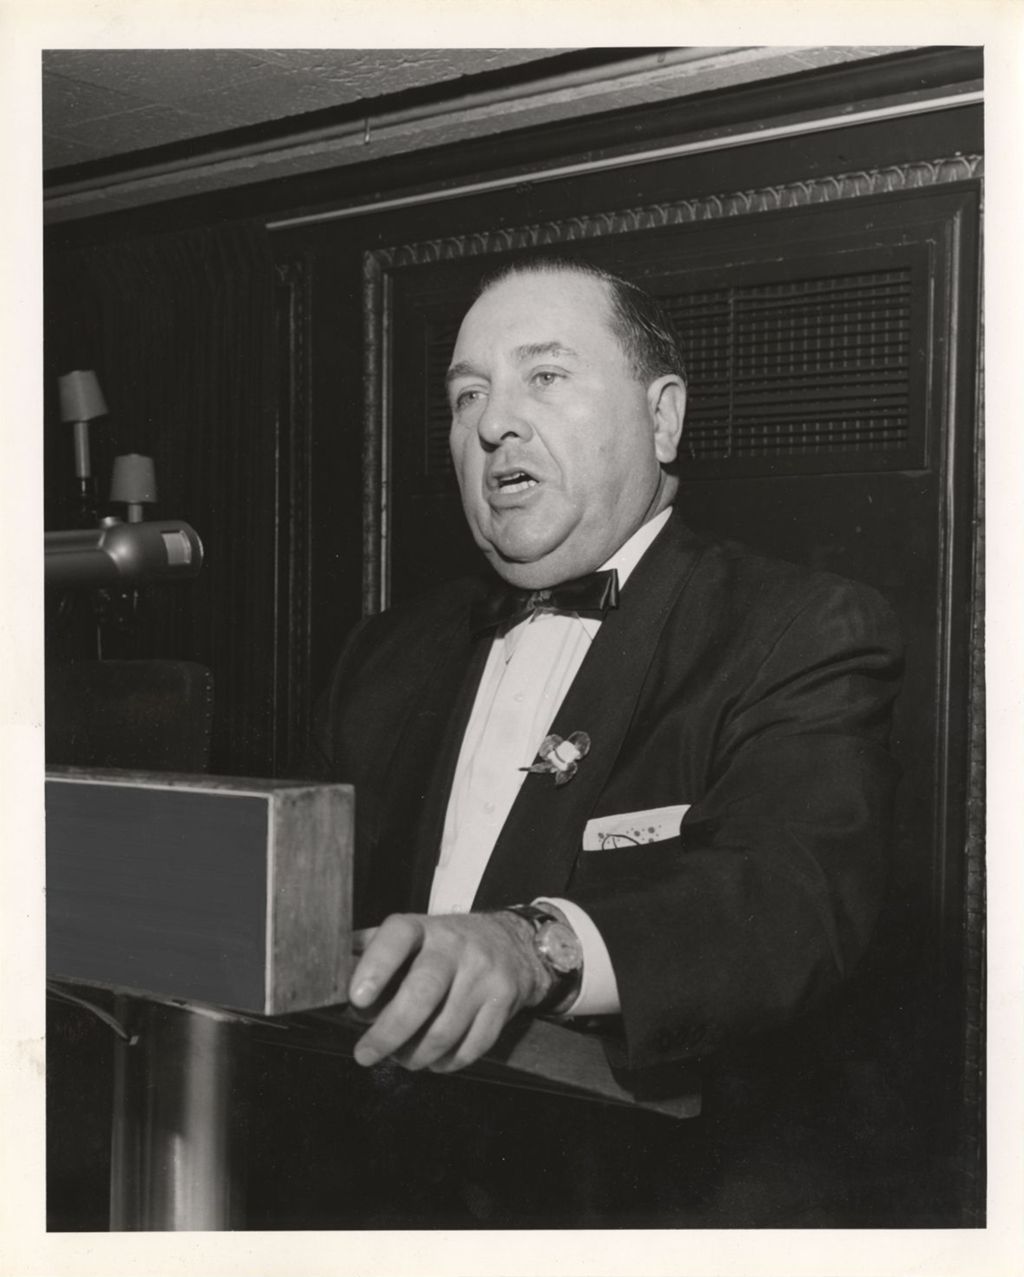 Miniature of Irish Fellowship Club of Chicago 56th annual St. Patrick's Day Banquet, Richard J. Daley speaking